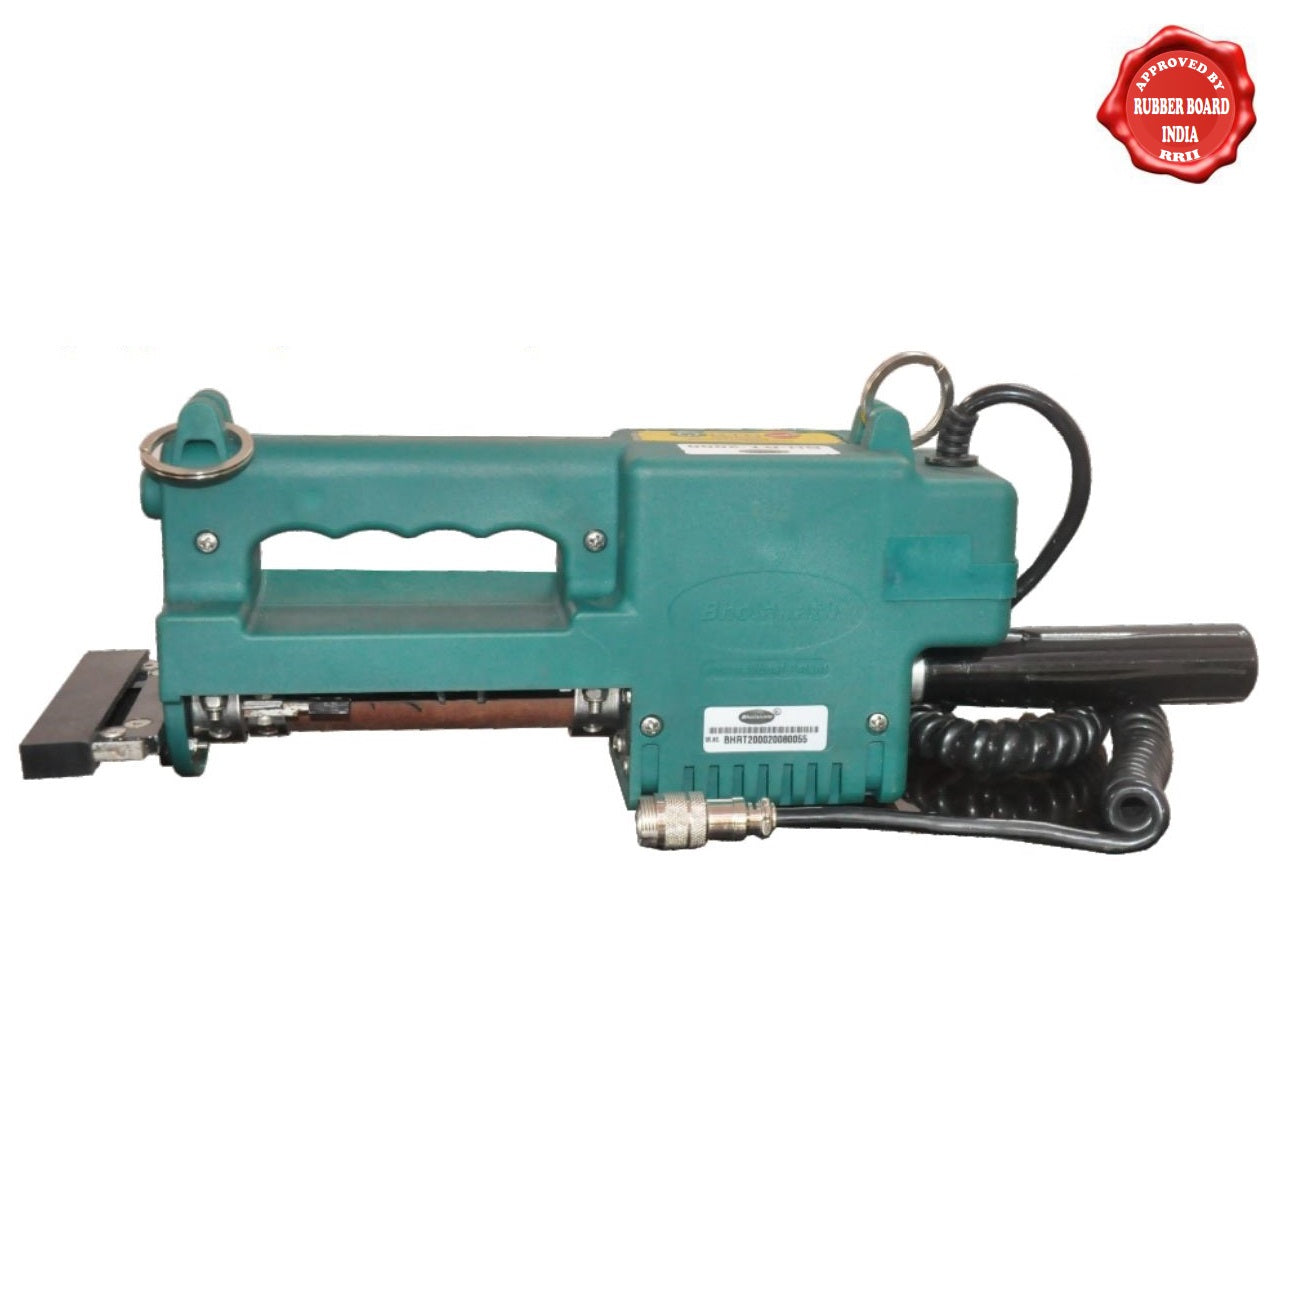 Bholanath Portable Rubber Tree Tapping Machine BH-RT-3000VT for New Tree